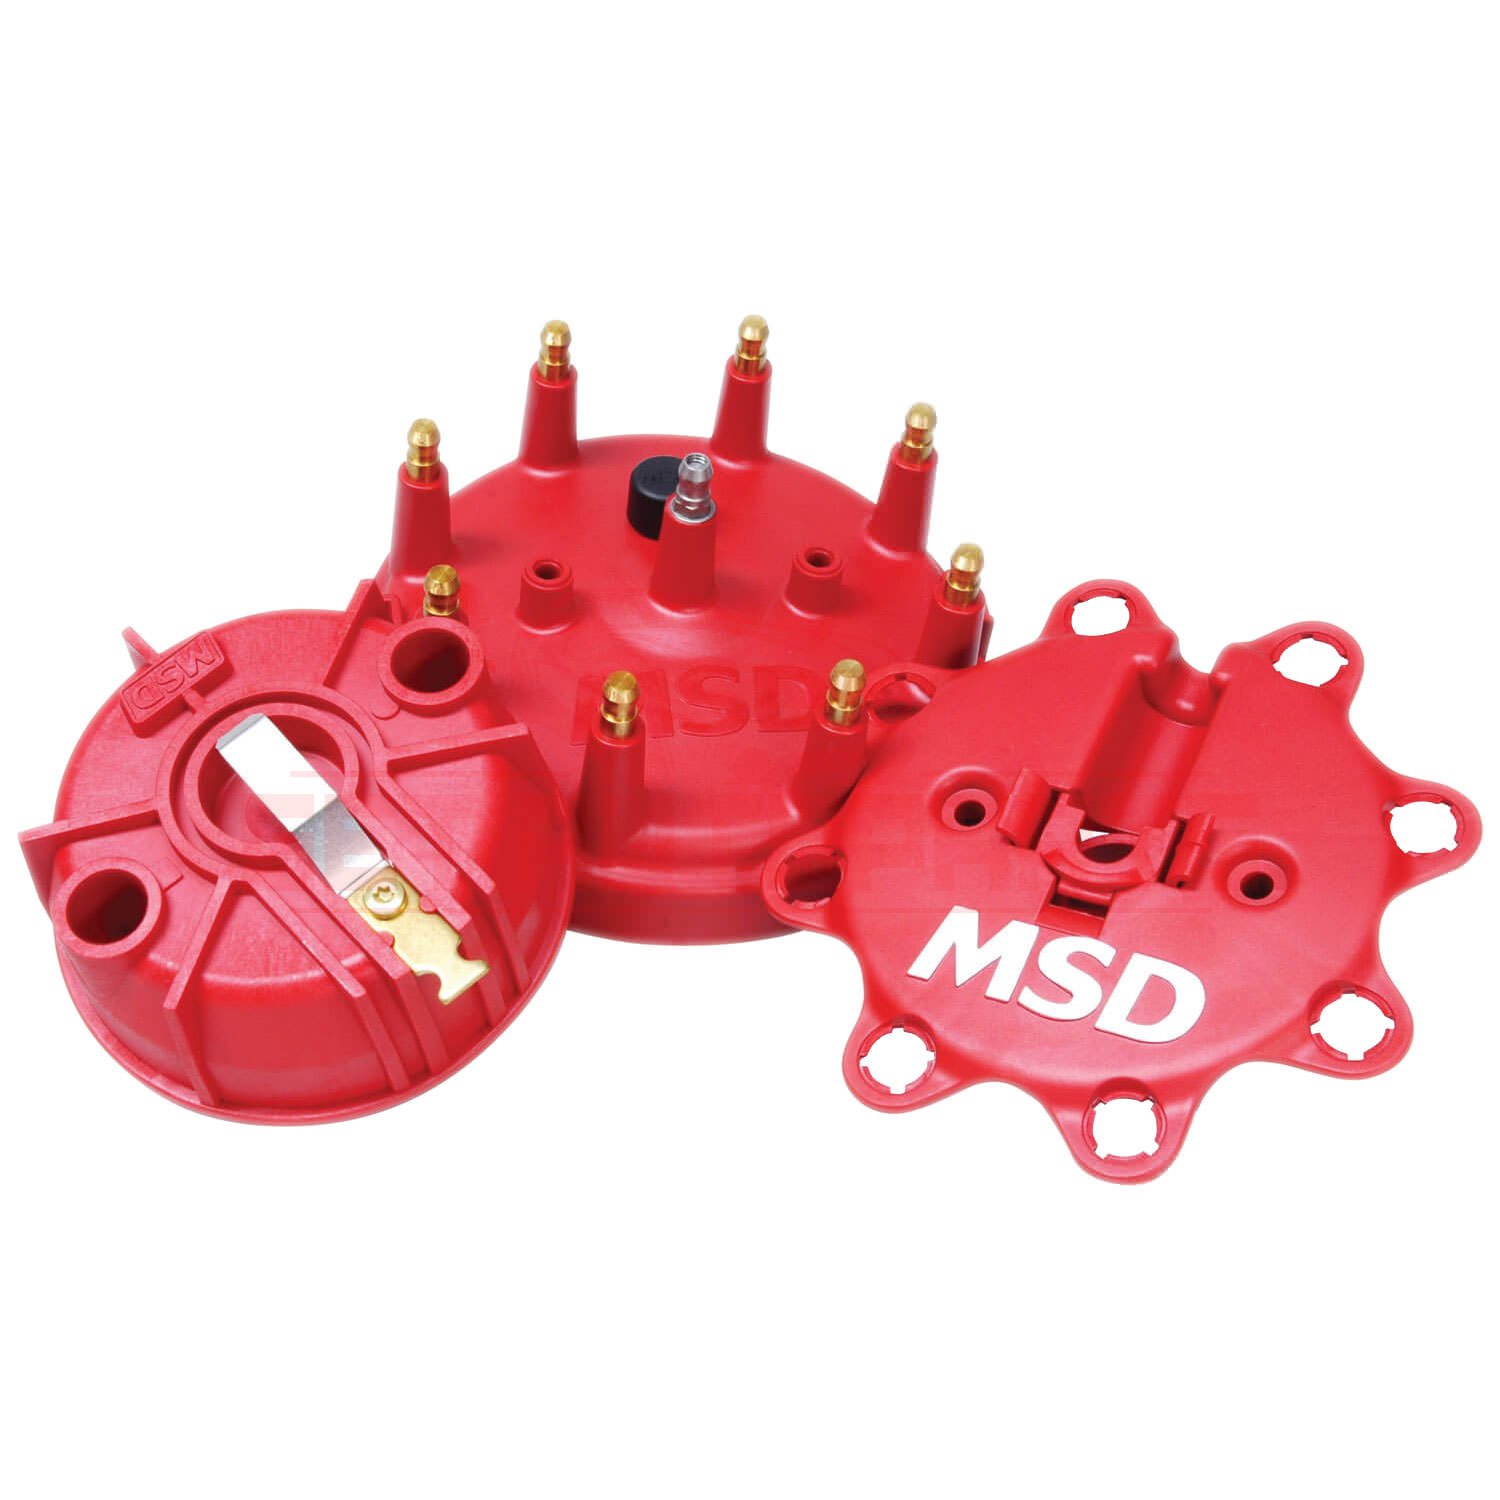 MSD Distributor Cap and Rotor Kit fits Lincoln Town Car 81-1990